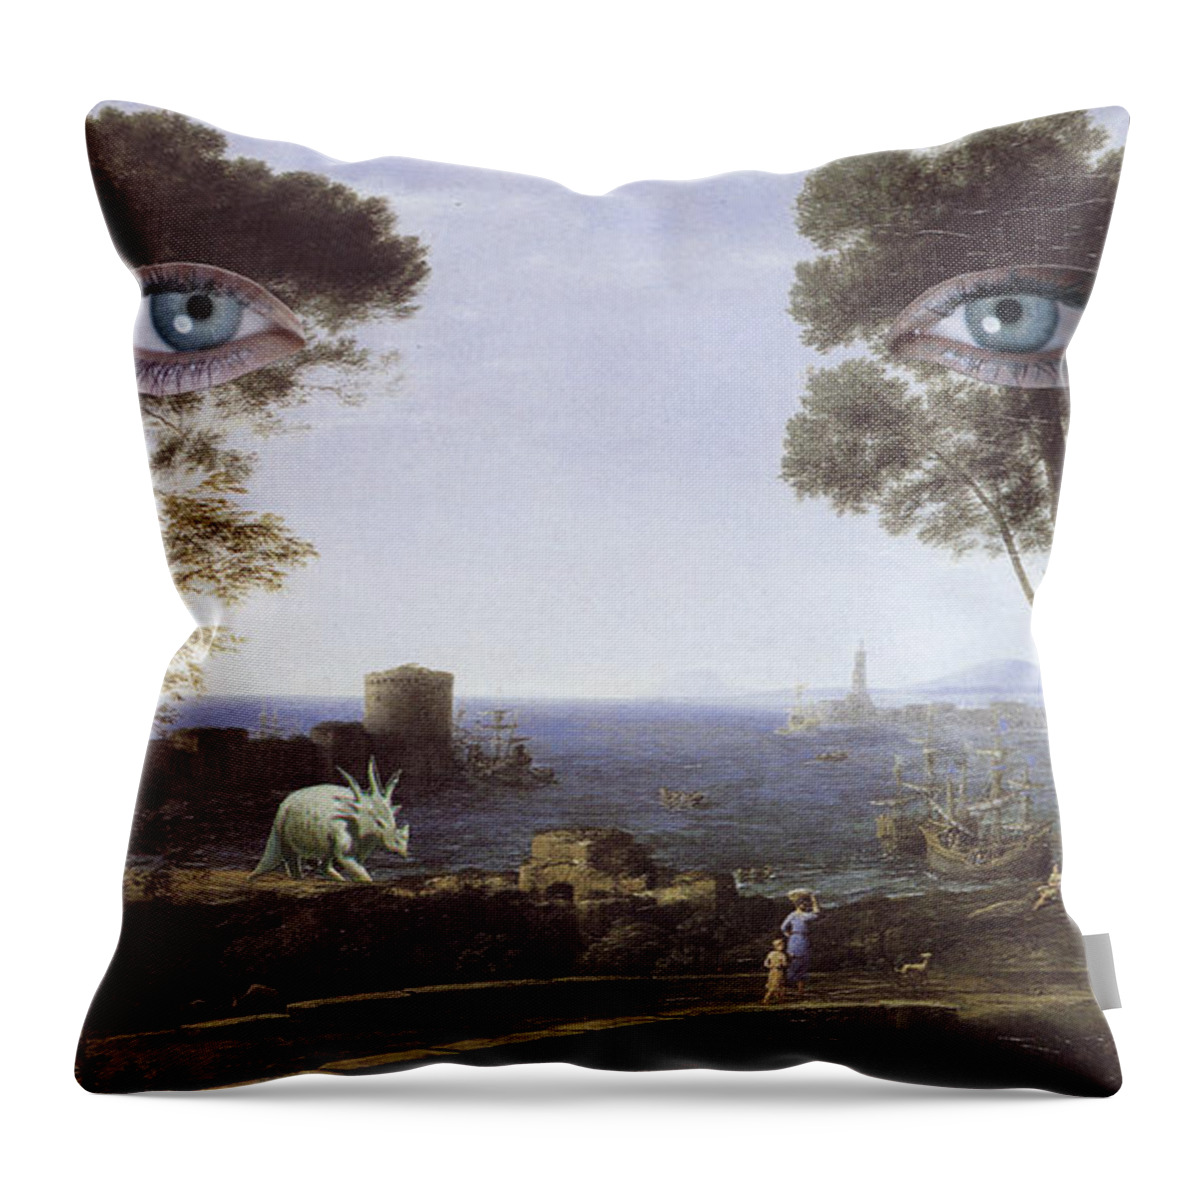 Collage Throw Pillow featuring the mixed media Falling by Joseph Demaree